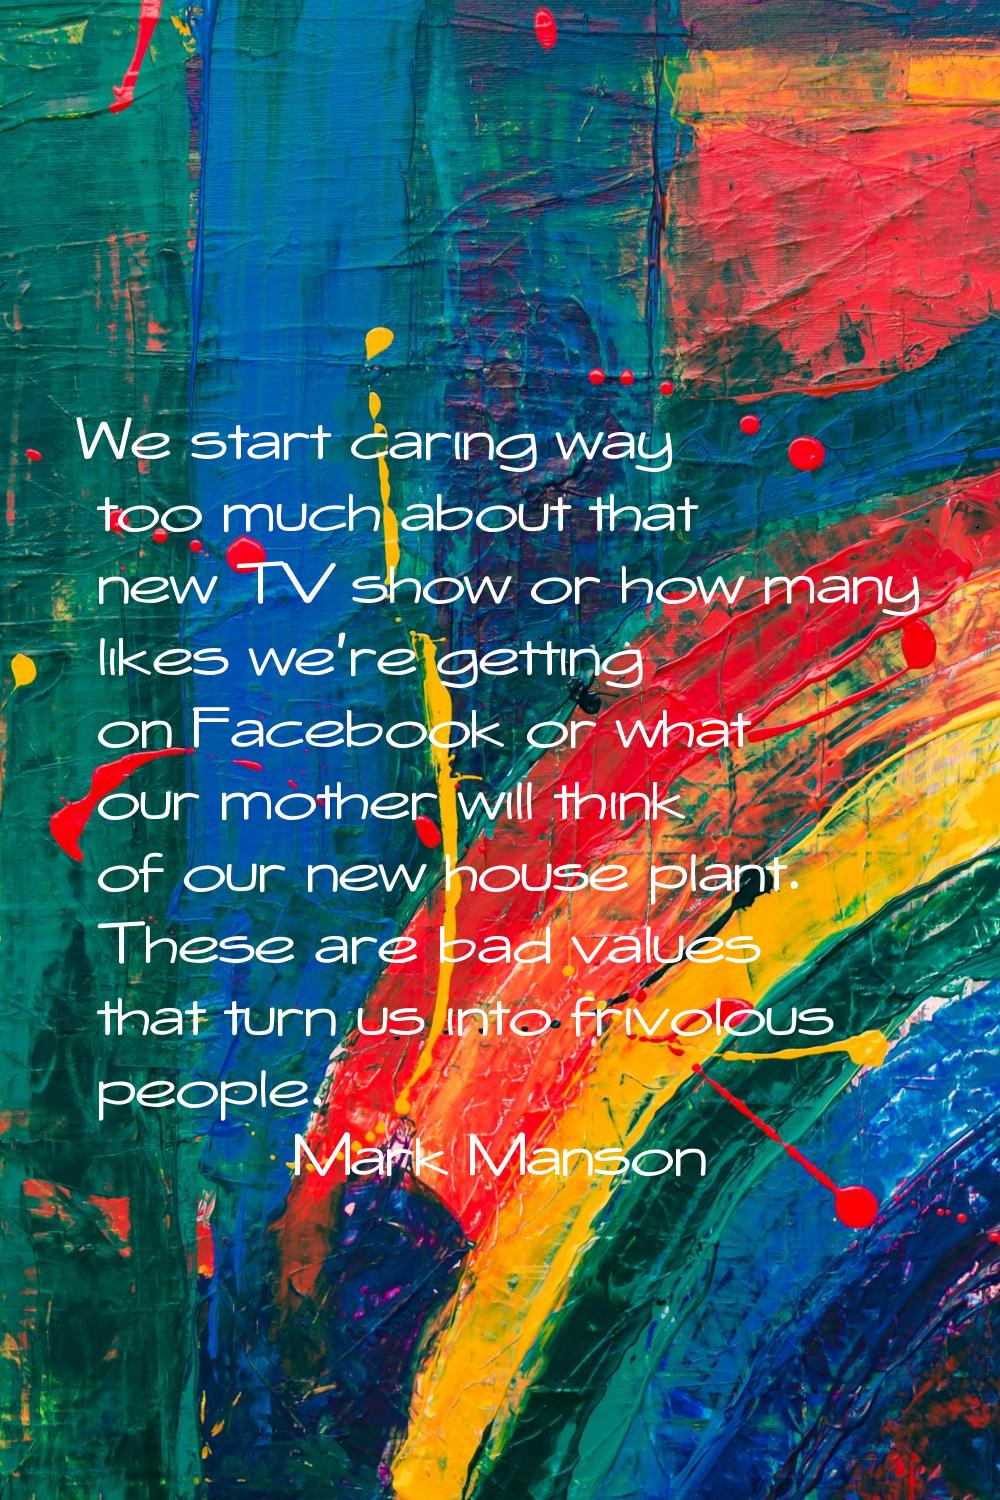 We start caring way too much about that new TV show or how many likes we're getting on Facebook or 